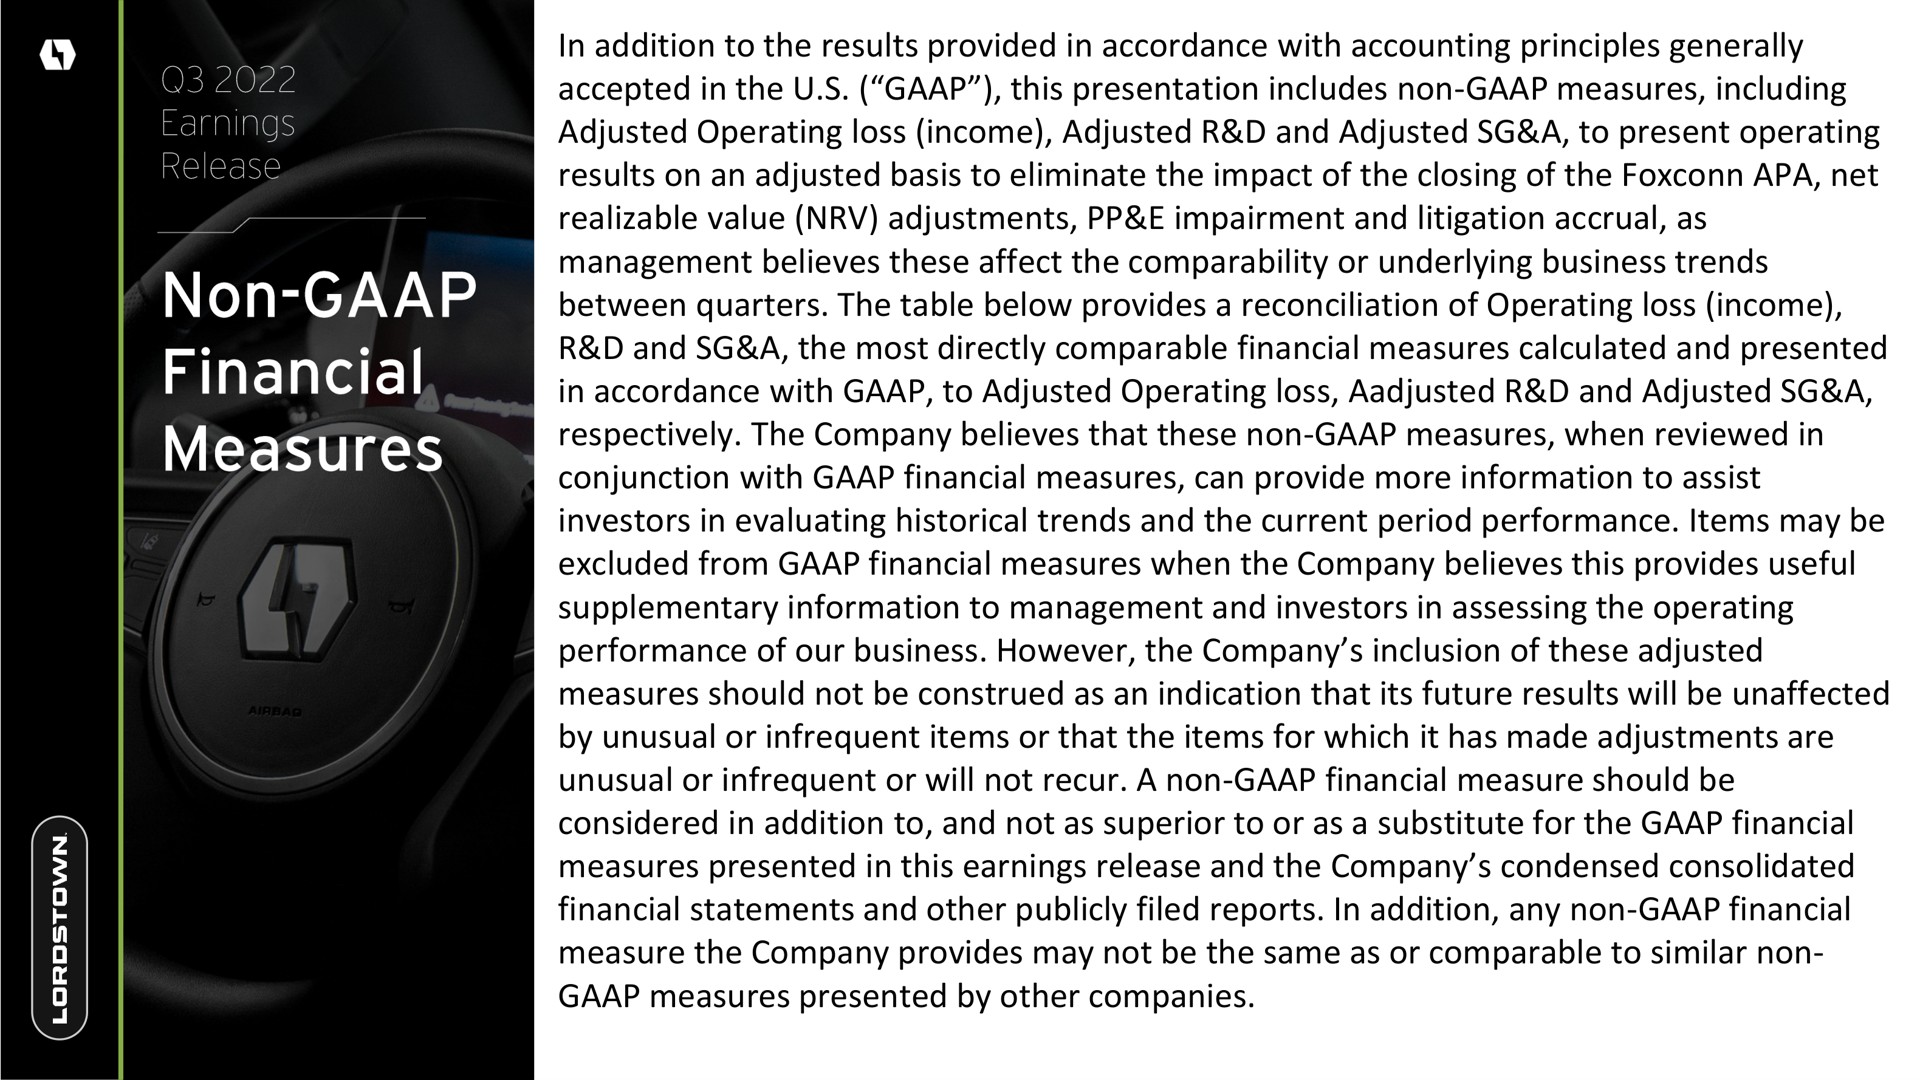 in addition to the results provided in accordance with accounting principles generally accepted in the this presentation includes non measures including adjusted operating loss income adjusted and adjusted a to present operating results on an adjusted basis to eliminate the impact of the closing of the apa net realizable value adjustments impairment and litigation accrual as management believes these affect the comparability or underlying business trends between quarters the table below provides a reconciliation of operating loss income and a the most directly comparable financial measures calculated and presented in accordance with to adjusted operating loss and adjusted a respectively the company believes that these non measures when reviewed in conjunction with financial measures can provide more information to assist investors in evaluating historical trends and the current period performance items may be excluded from financial measures when the company believes this provides useful supplementary information to management and investors in assessing the operating performance of our business however the company inclusion of these adjusted measures should not be construed as an indication that its future results will be unaffected by unusual or infrequent items or that the items for which it has made adjustments are unusual or infrequent or will not recur a non financial measure should be considered in addition to and not as superior to or as a substitute for the financial measures presented in this earnings release and the company condensed consolidated financial statements and other publicly filed reports in addition any non financial measure the company provides may not be the same as or comparable to similar non measures presented by other companies | Lordstown Motors